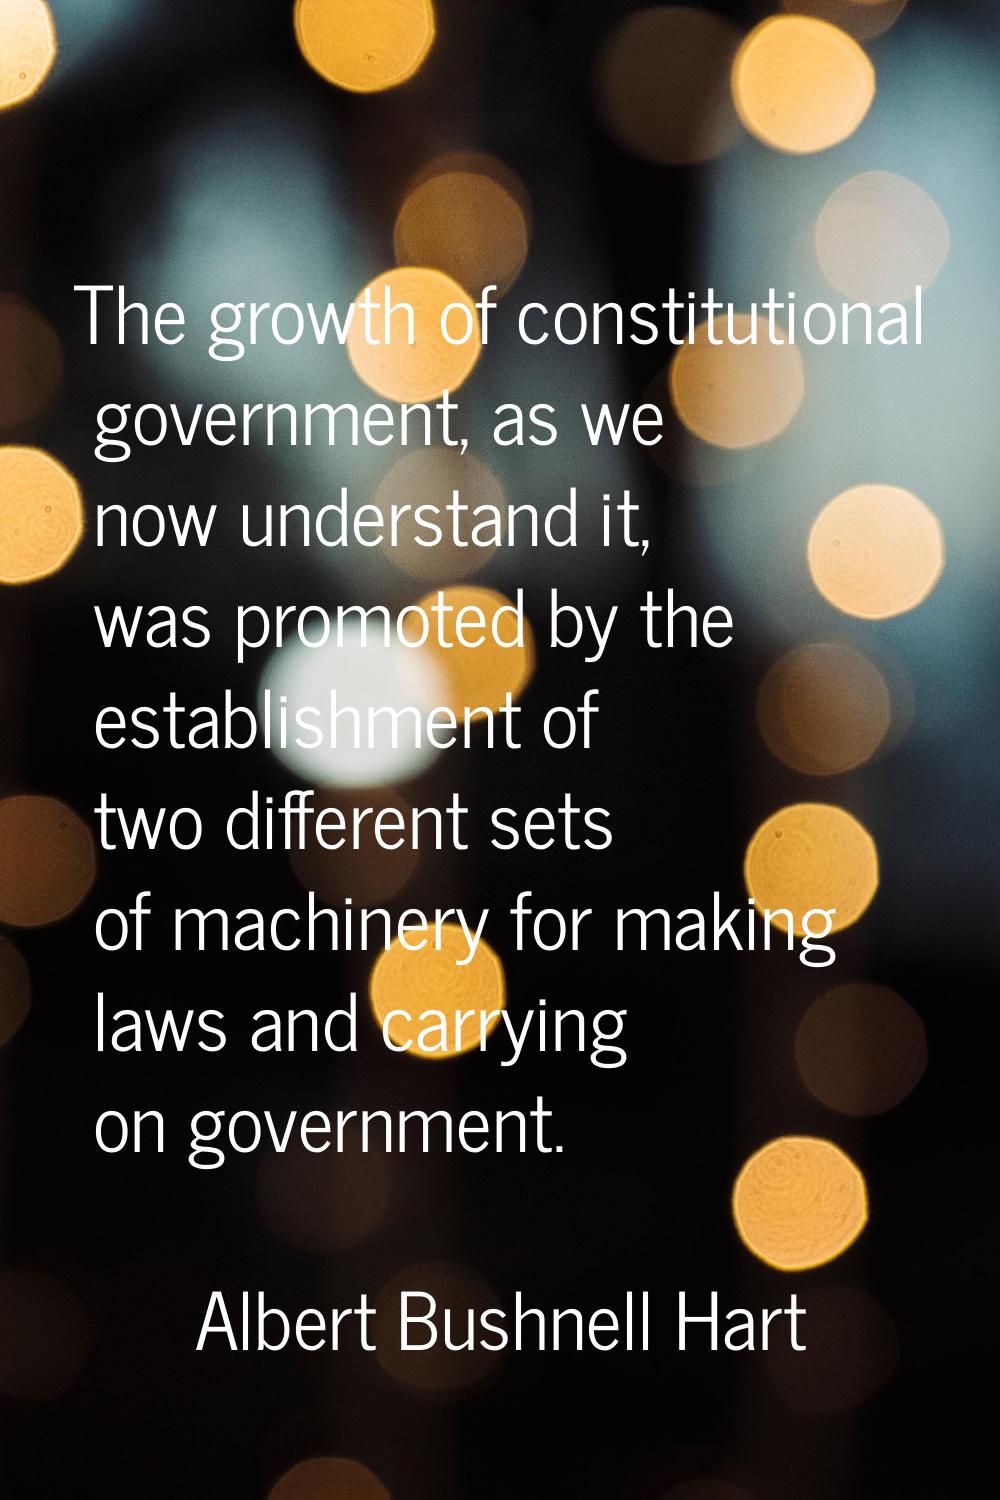 The growth of constitutional government, as we now understand it, was promoted by the establishment